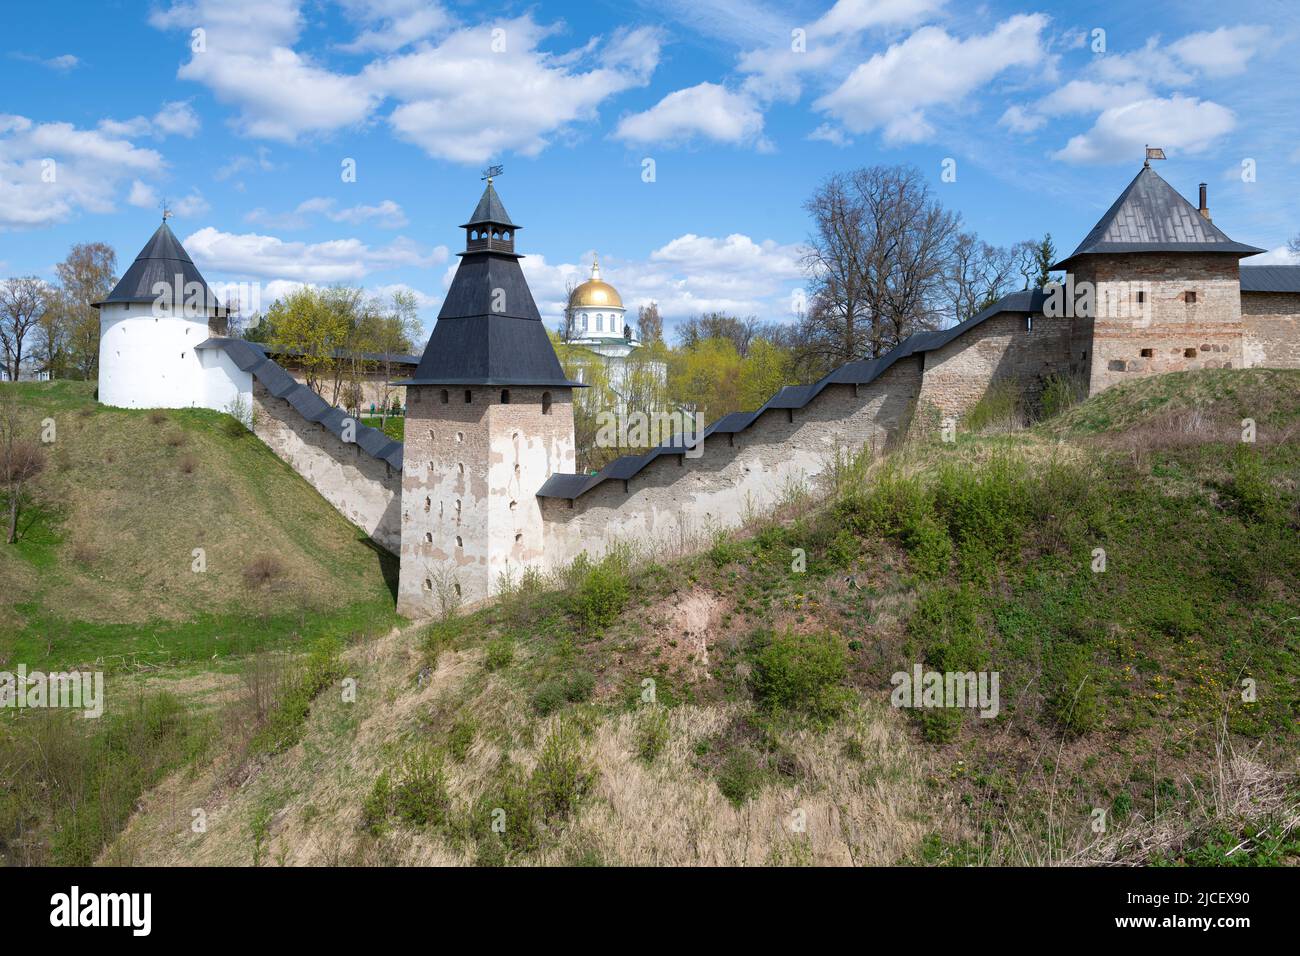 Sunny May day at the ancient walls of the Holy Assumption Pskov-Caves Monastery. Pechory, Pskov region. Russia Stock Photo